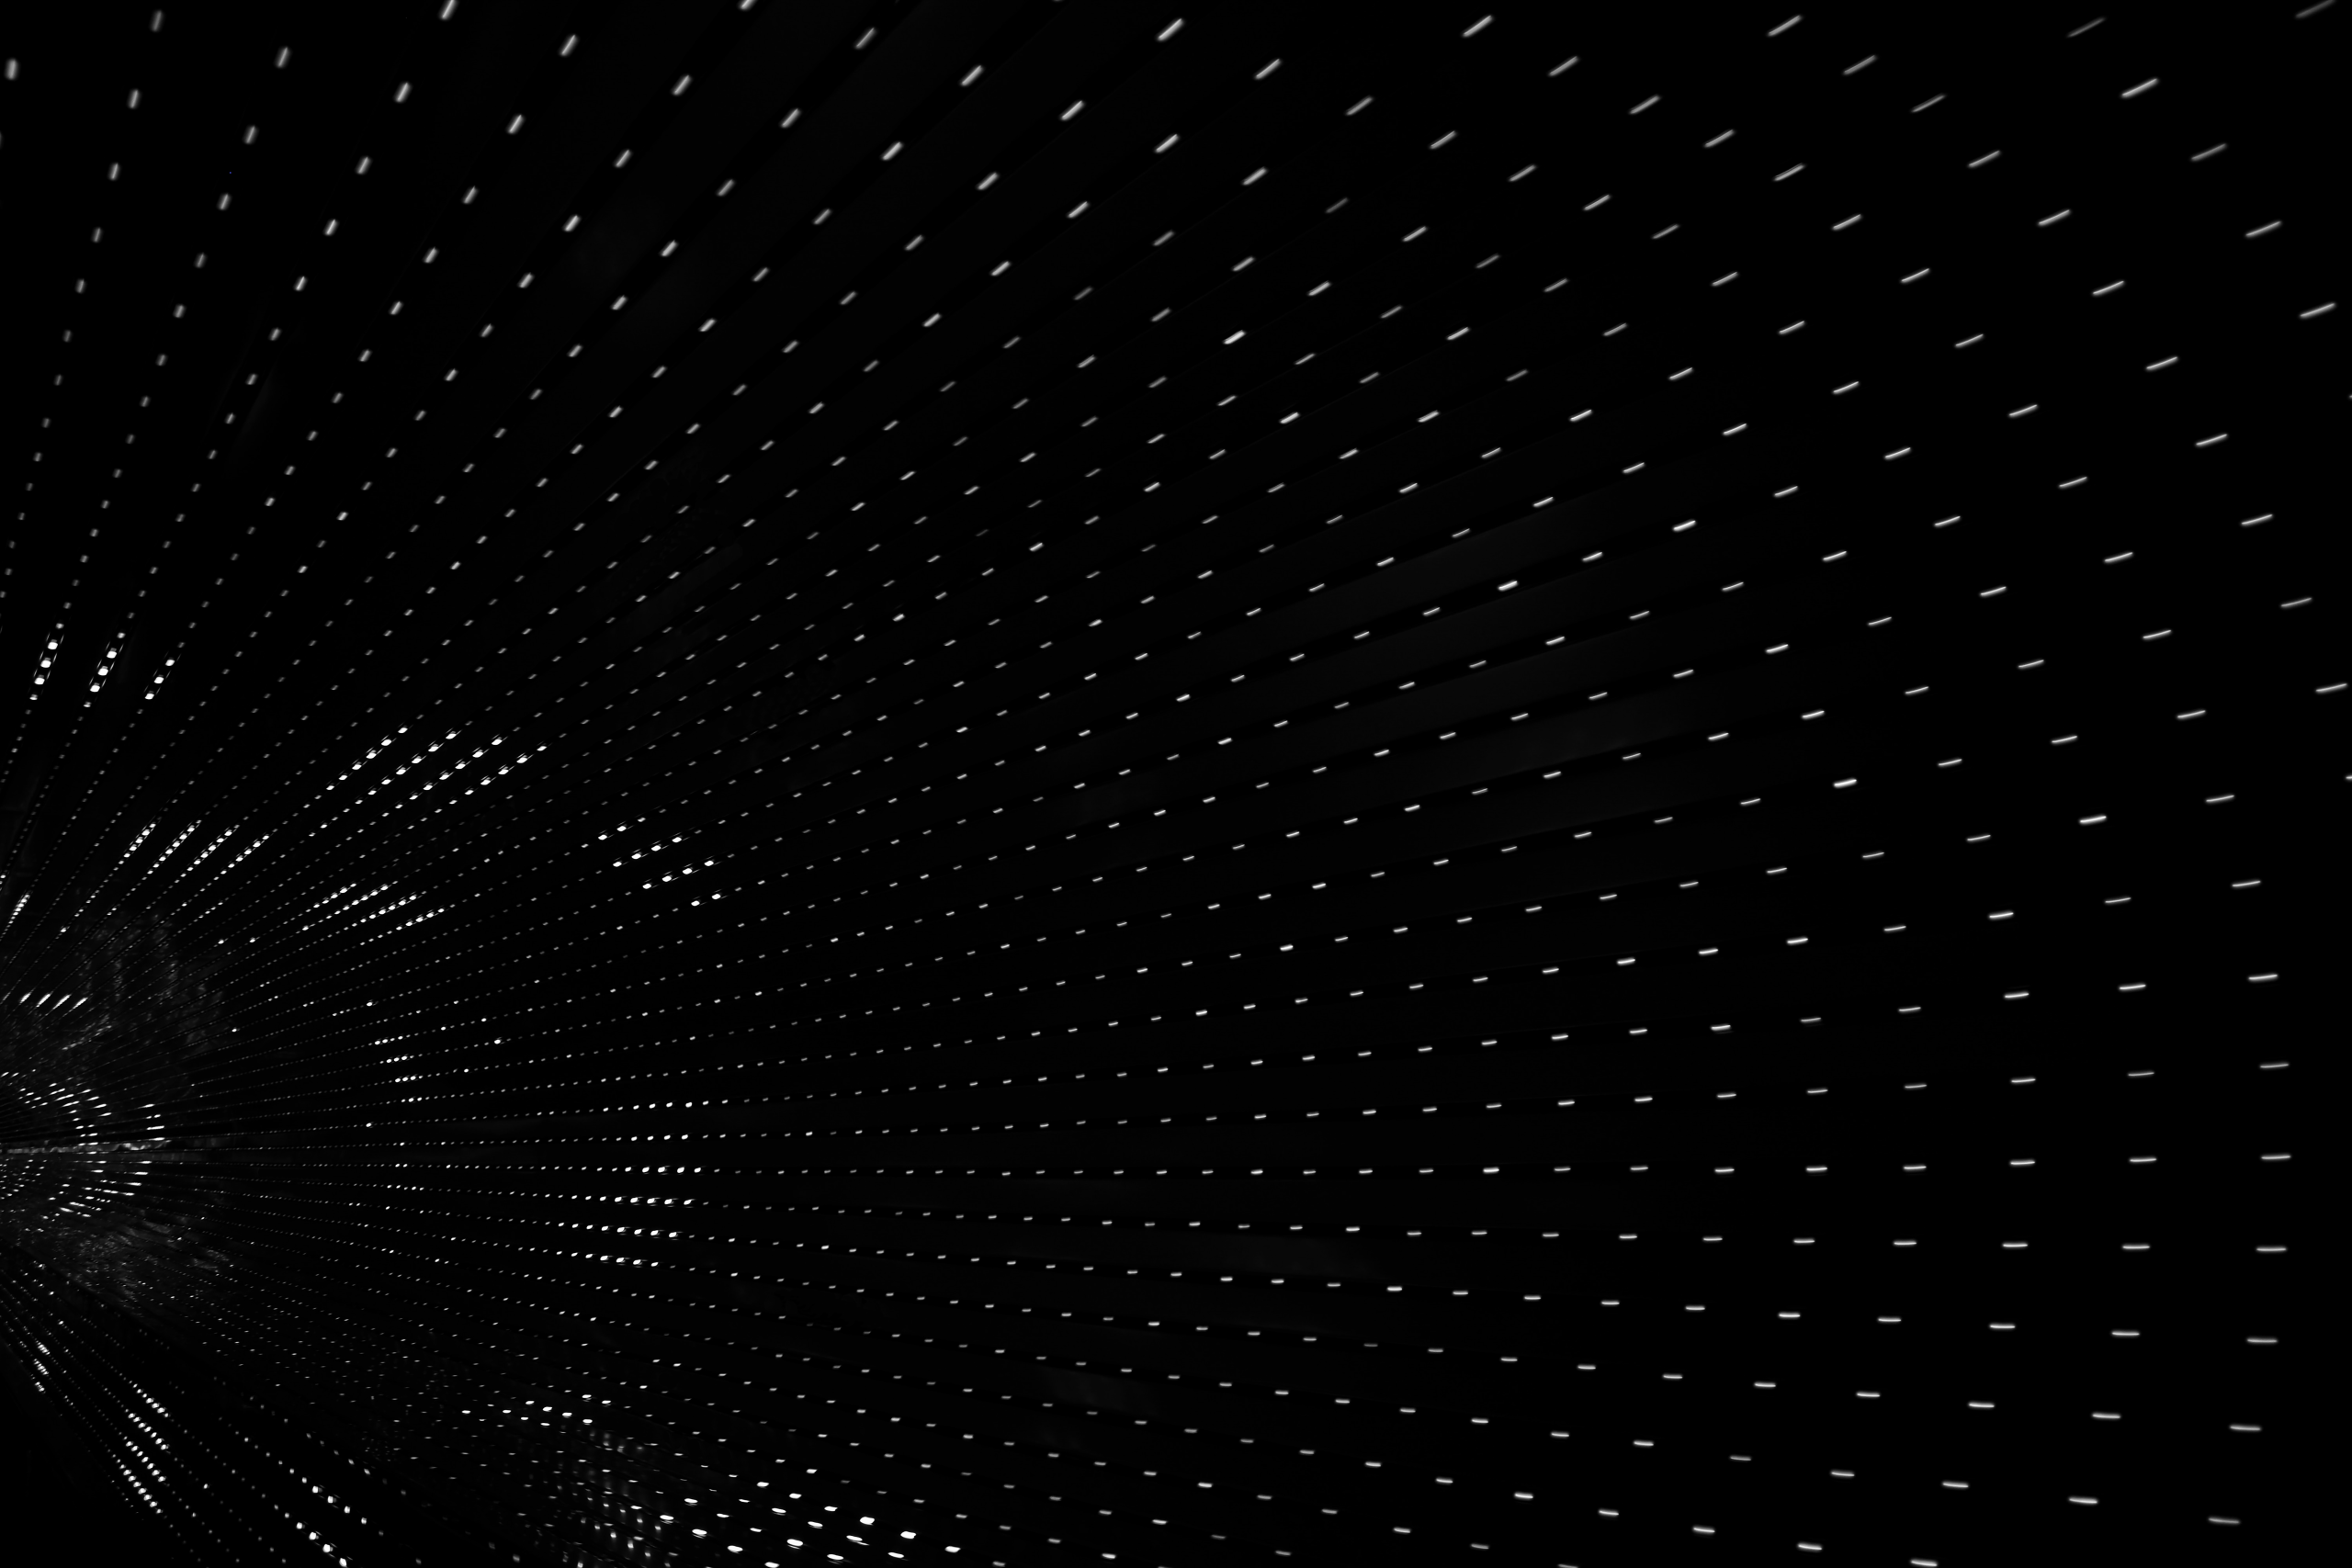 Black tunnel interior with white lights representing data and information travelling.